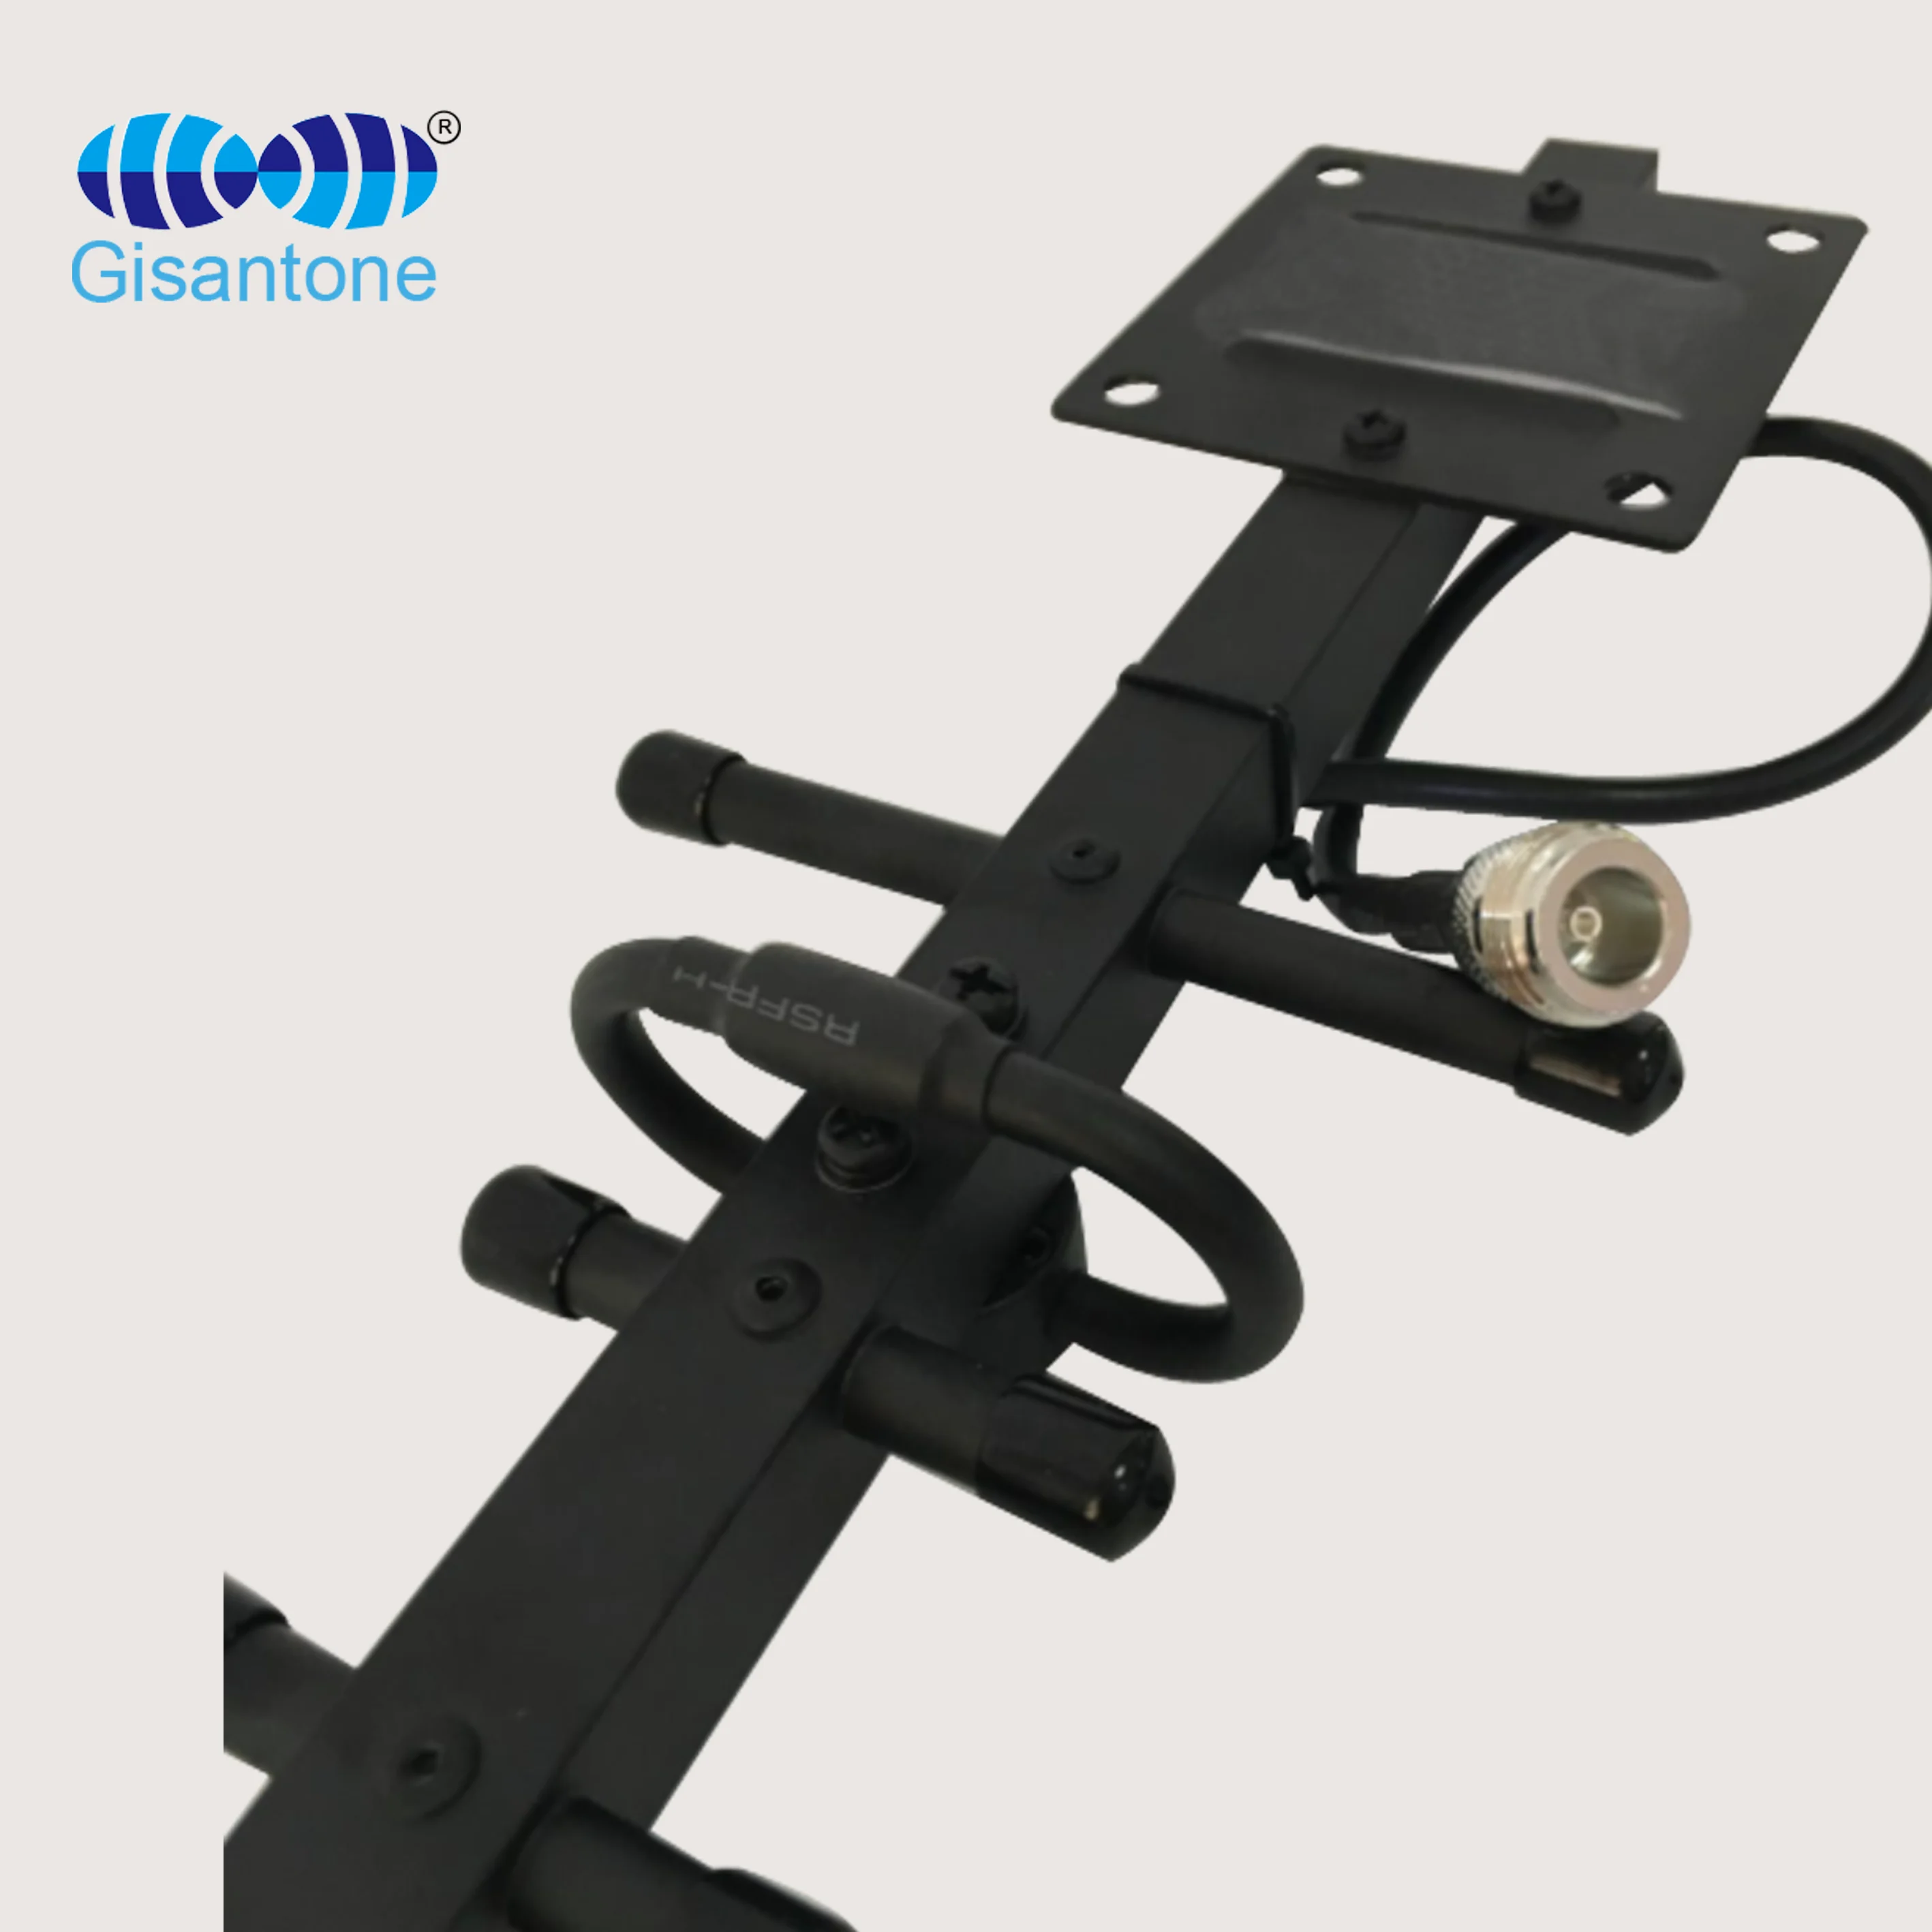 Outdoor antena vertical yagi tv antenna signal booster dedicated GSM/CDMA antenna for general reception and transmission